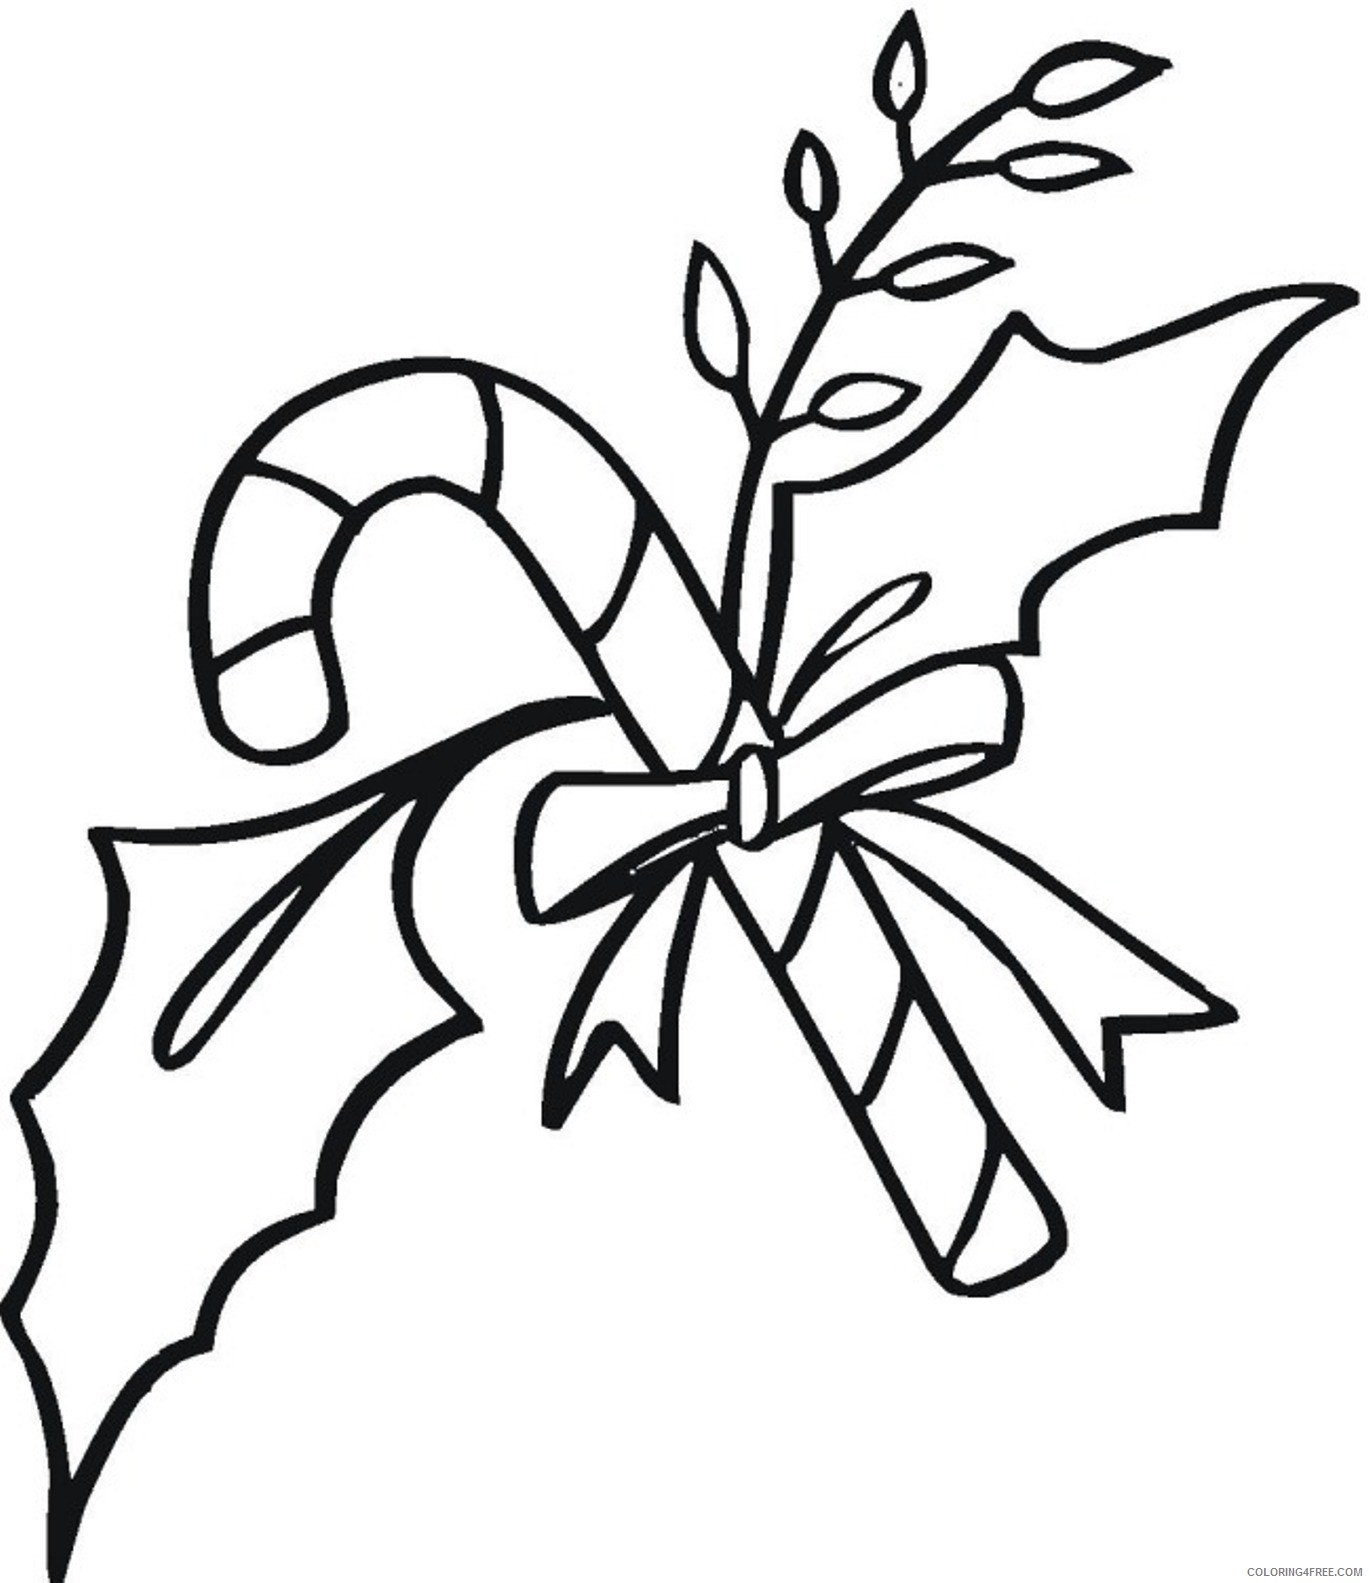 candy cane coloring pages free to print Coloring4free